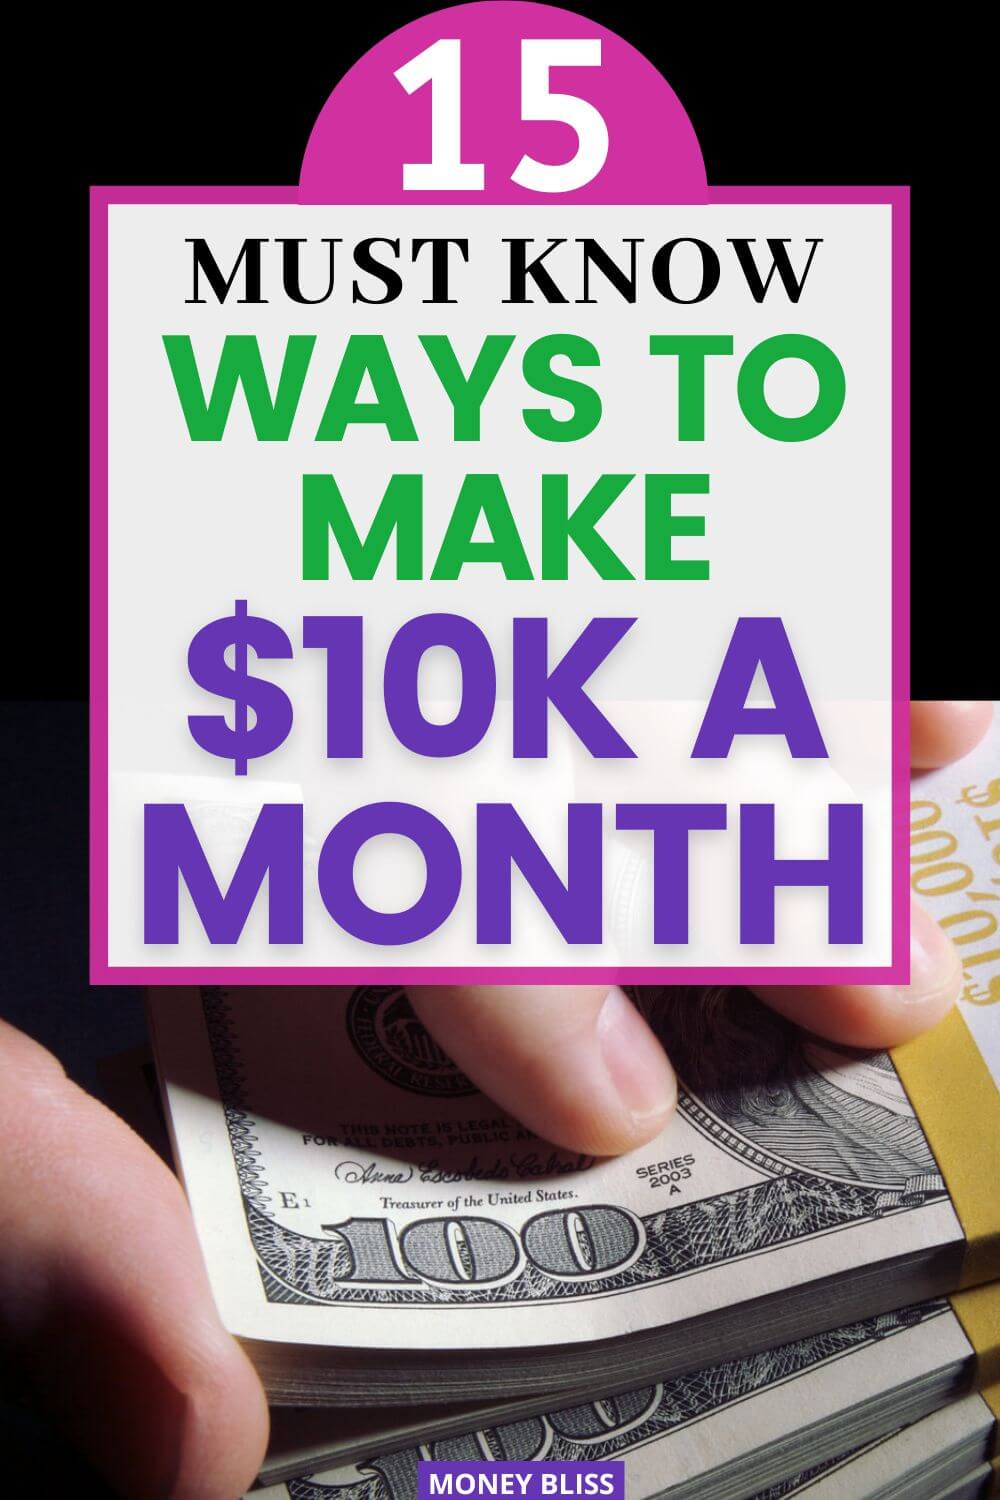 Are you looking for ways to make money quickly and easily? This guide will show you how to make 10k a month with a few different options. from home in just a few short steps. Whether you're looking for easy online ways to earn money from home or high-paying jobs, this guide has you covered.